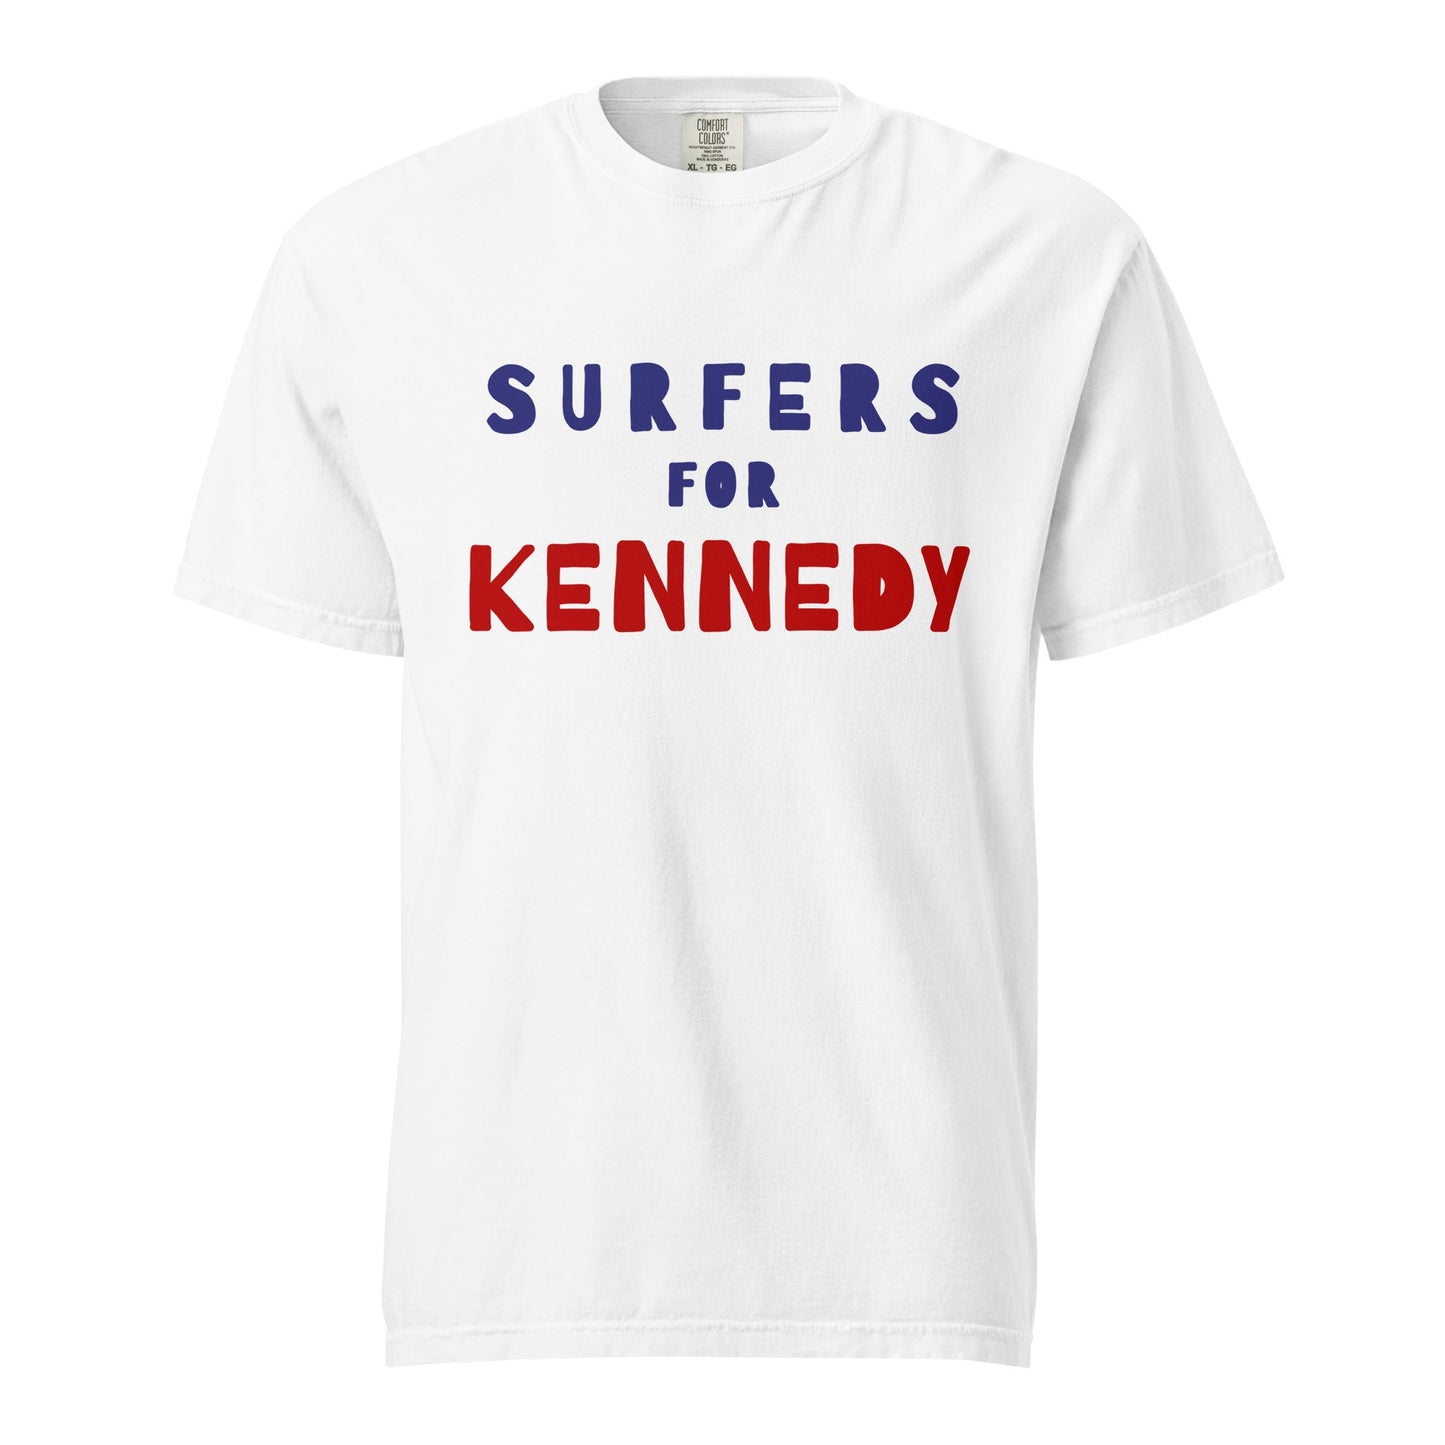 Surfers for Kennedy Unisex Heavyweight Tee - TEAM KENNEDY. All rights reserved